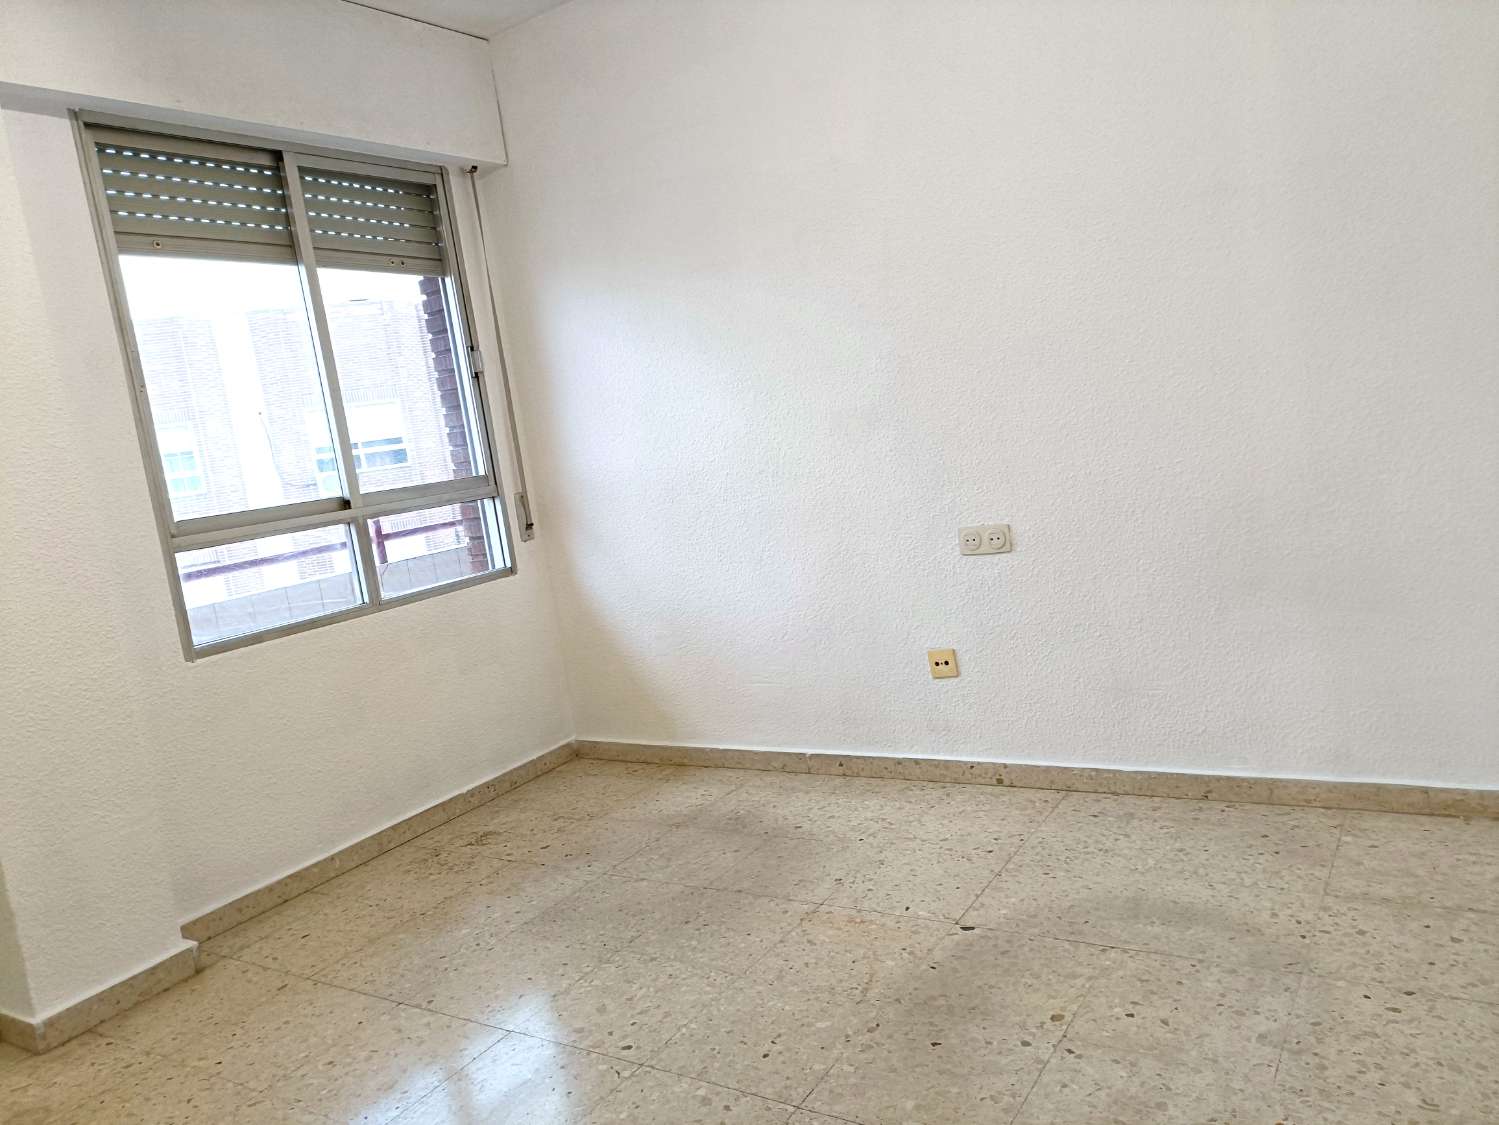 4 ROOM APARTMENT FOR SALE WITH GARAGE SPACE